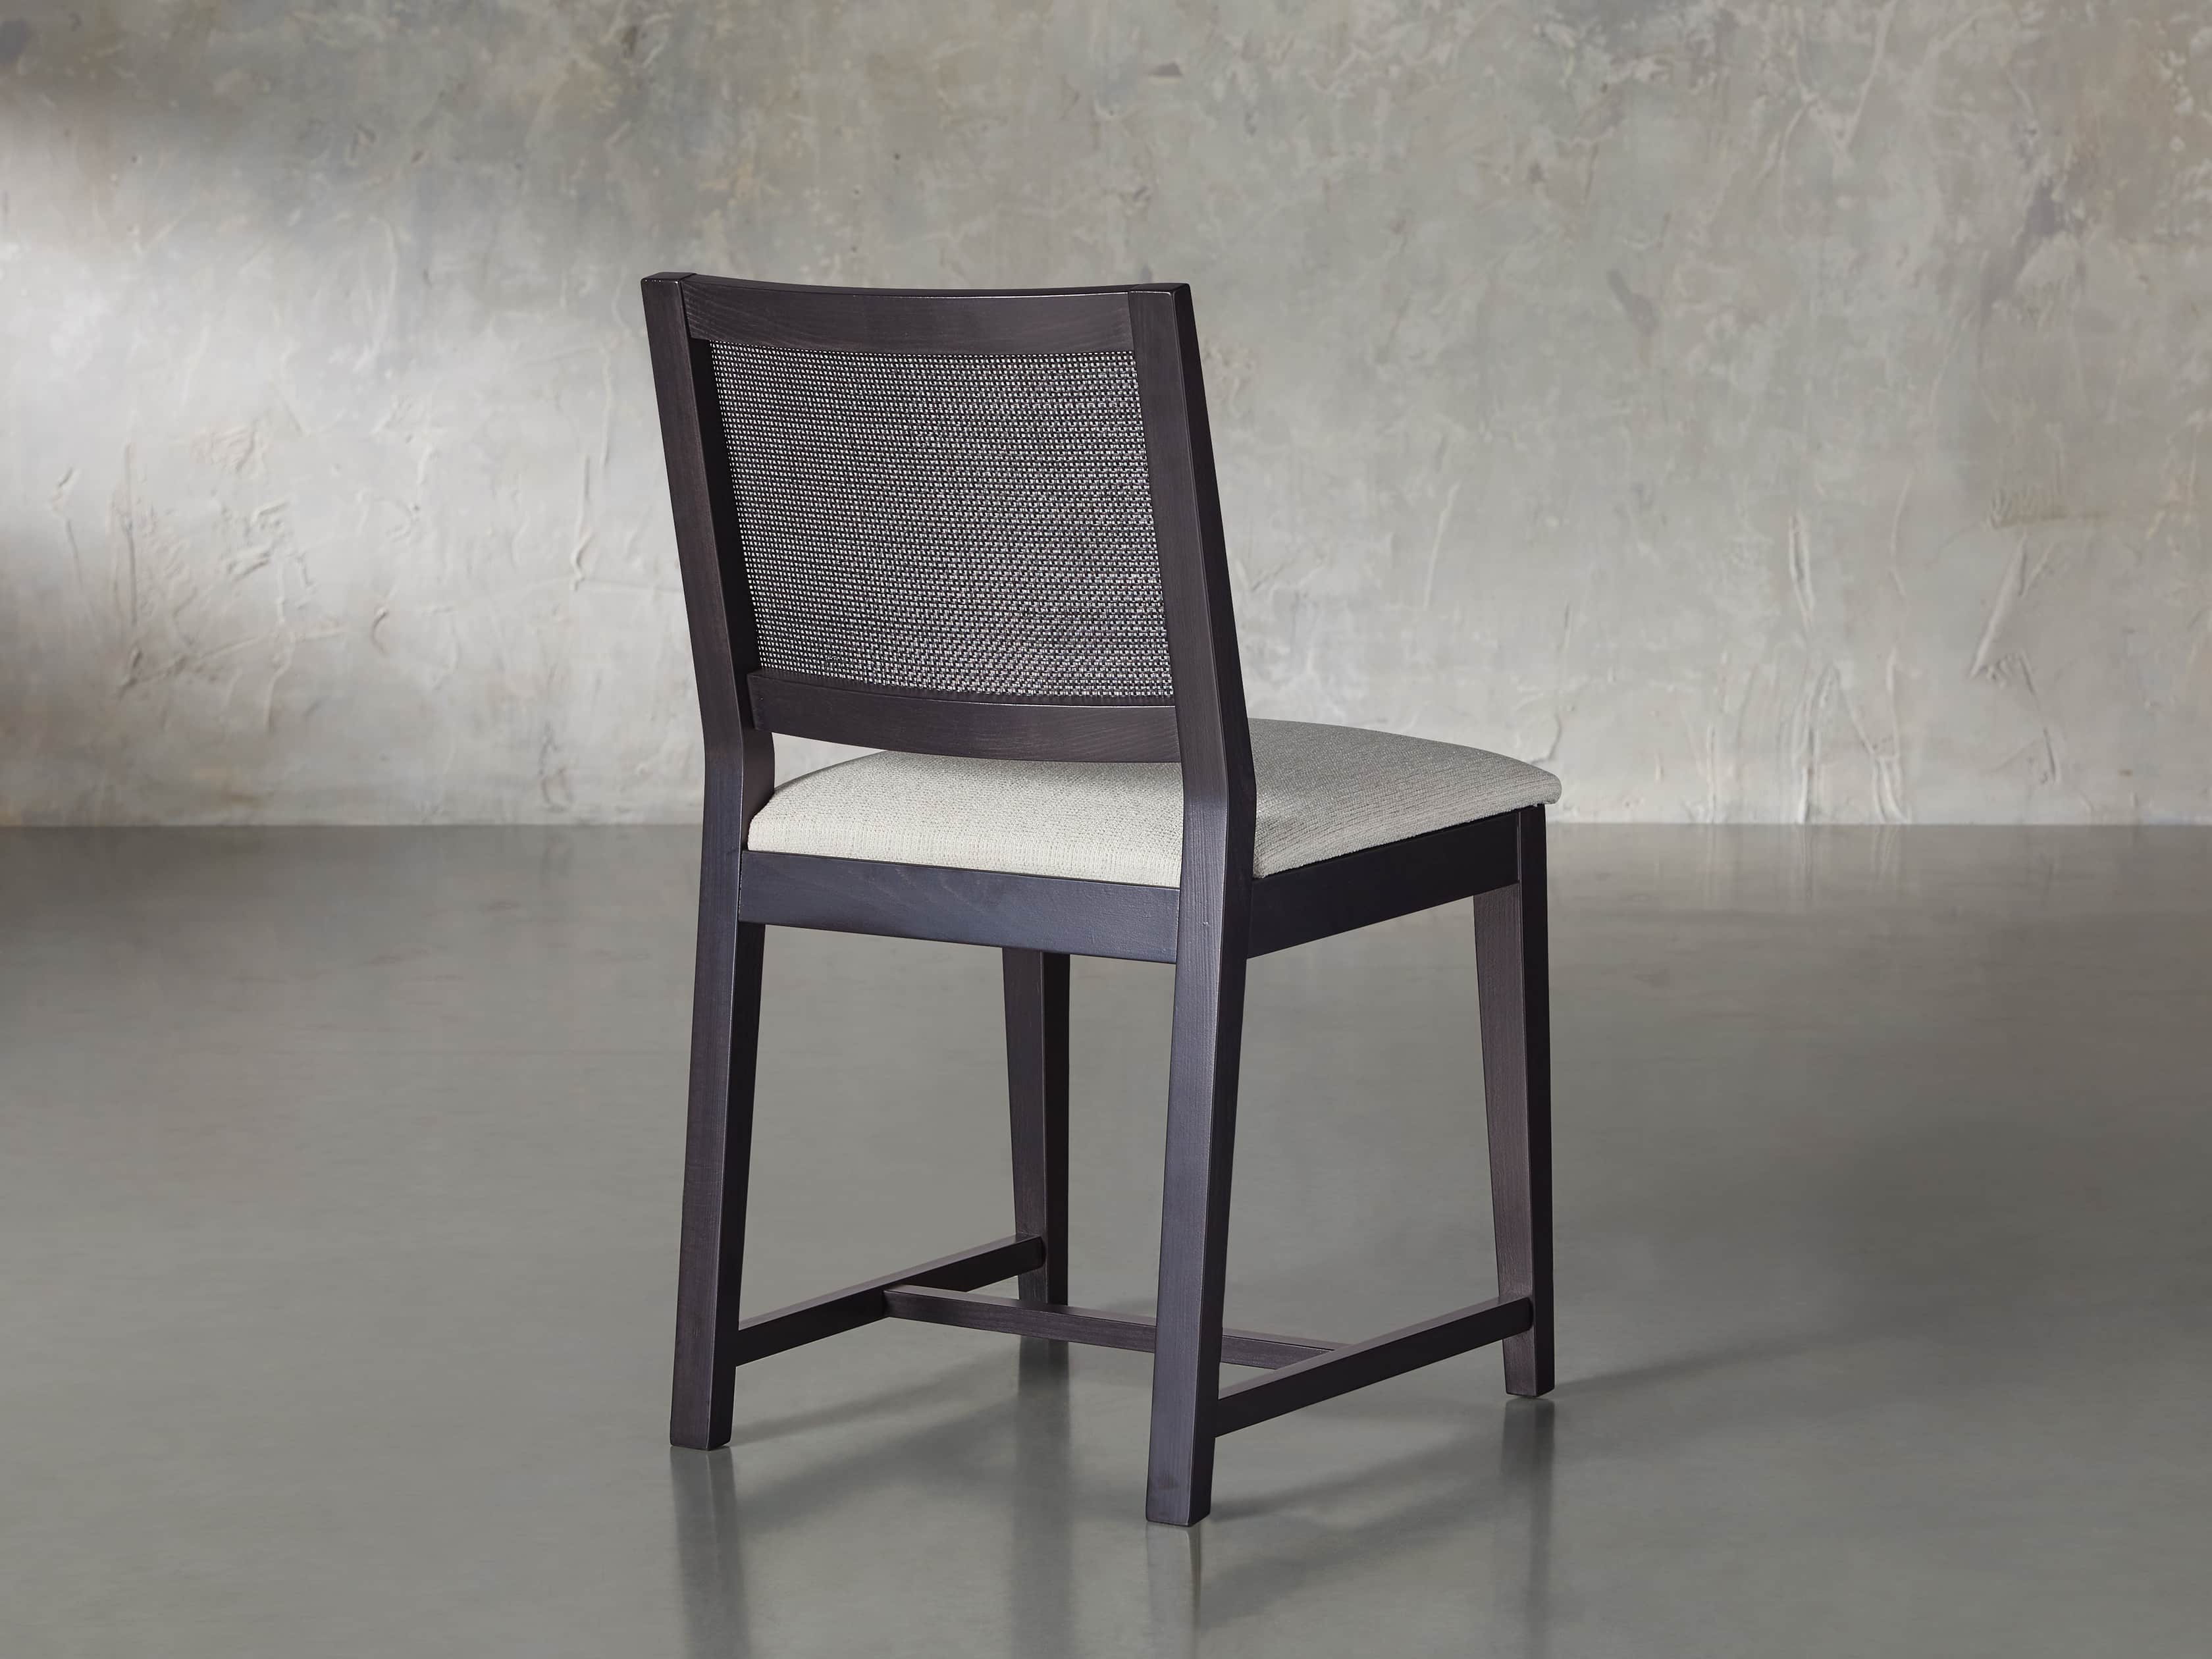 Grace Dining Chair In Midnight Arhaus, Folio Stone Top Grain Leather Dining Chair